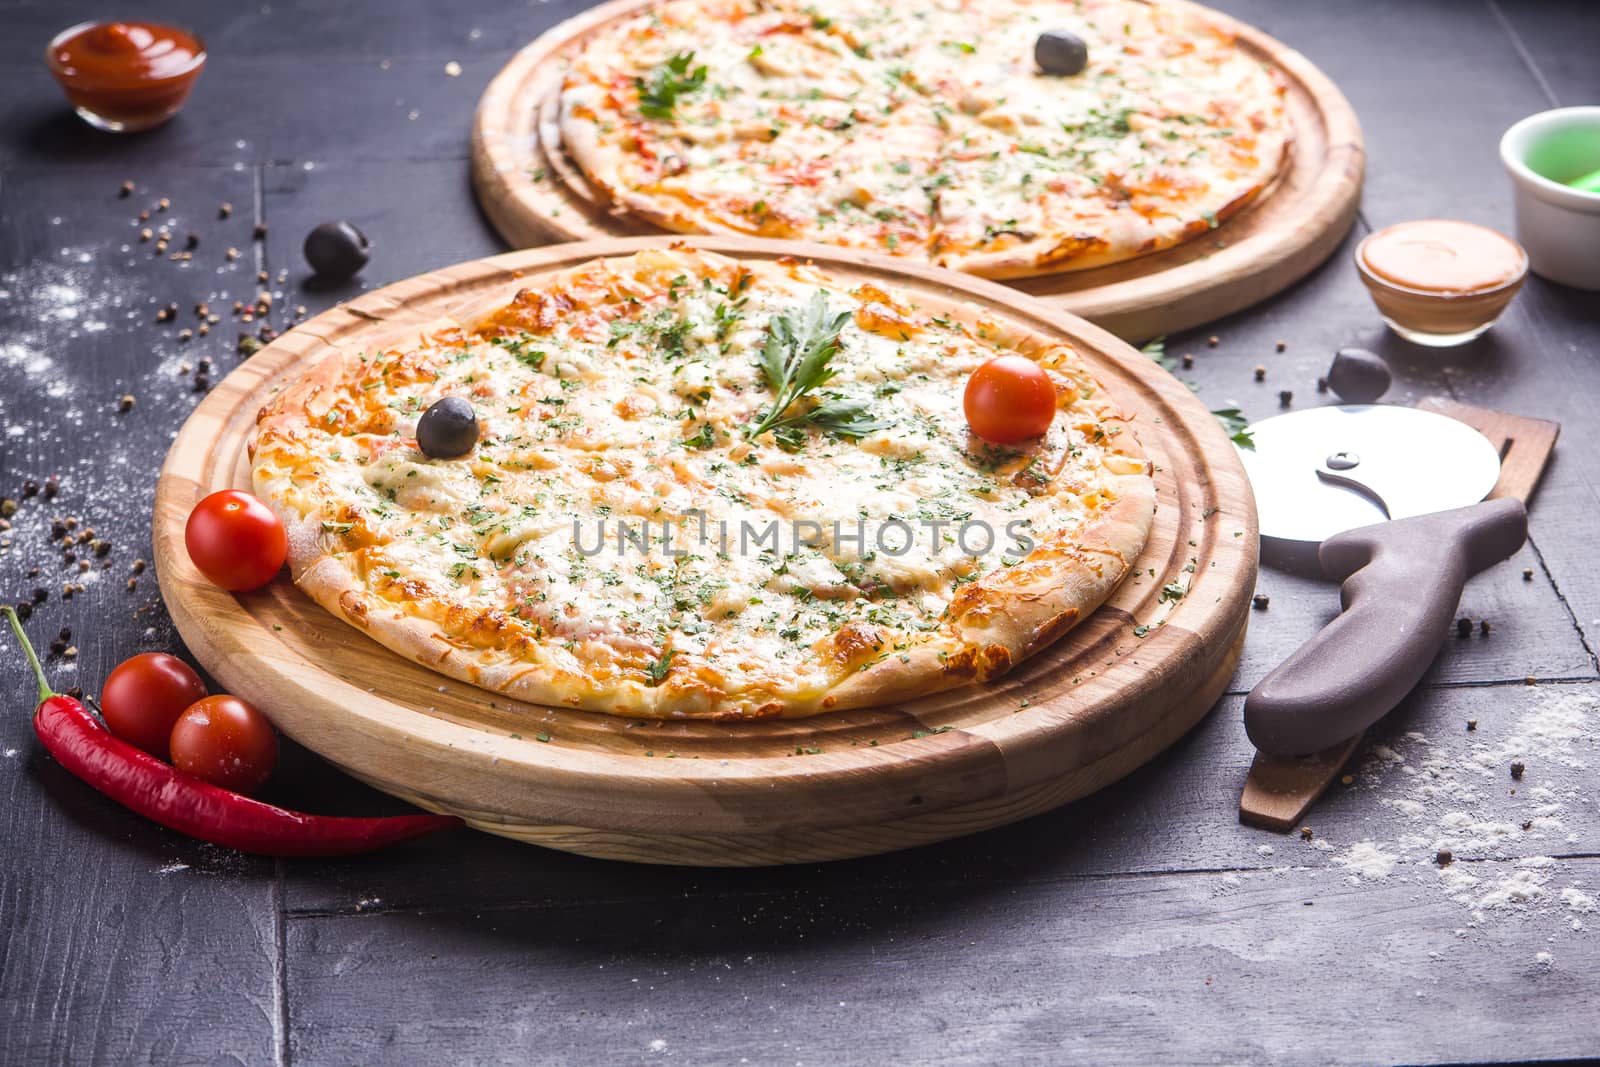 Fresh baked pizza by mrakor